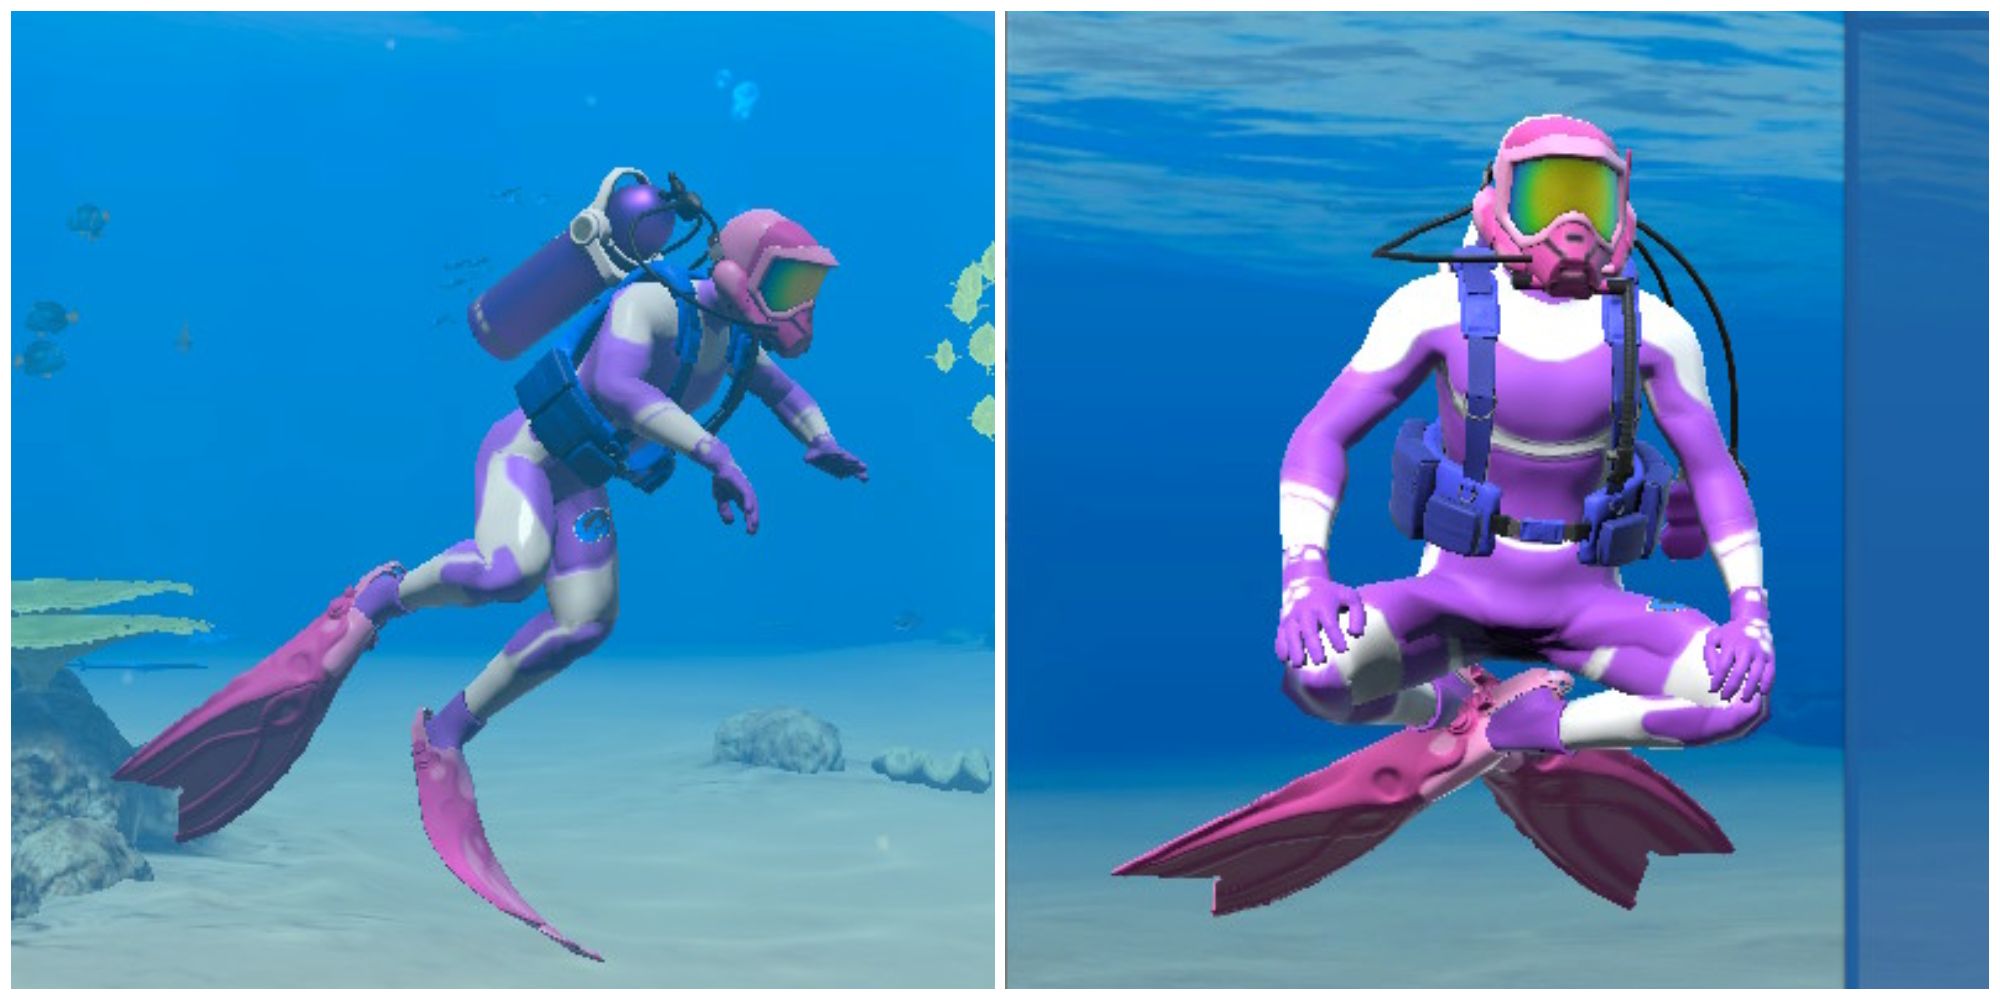 Split image of a customized outfit and an emote used in Endless Ocean Luminous